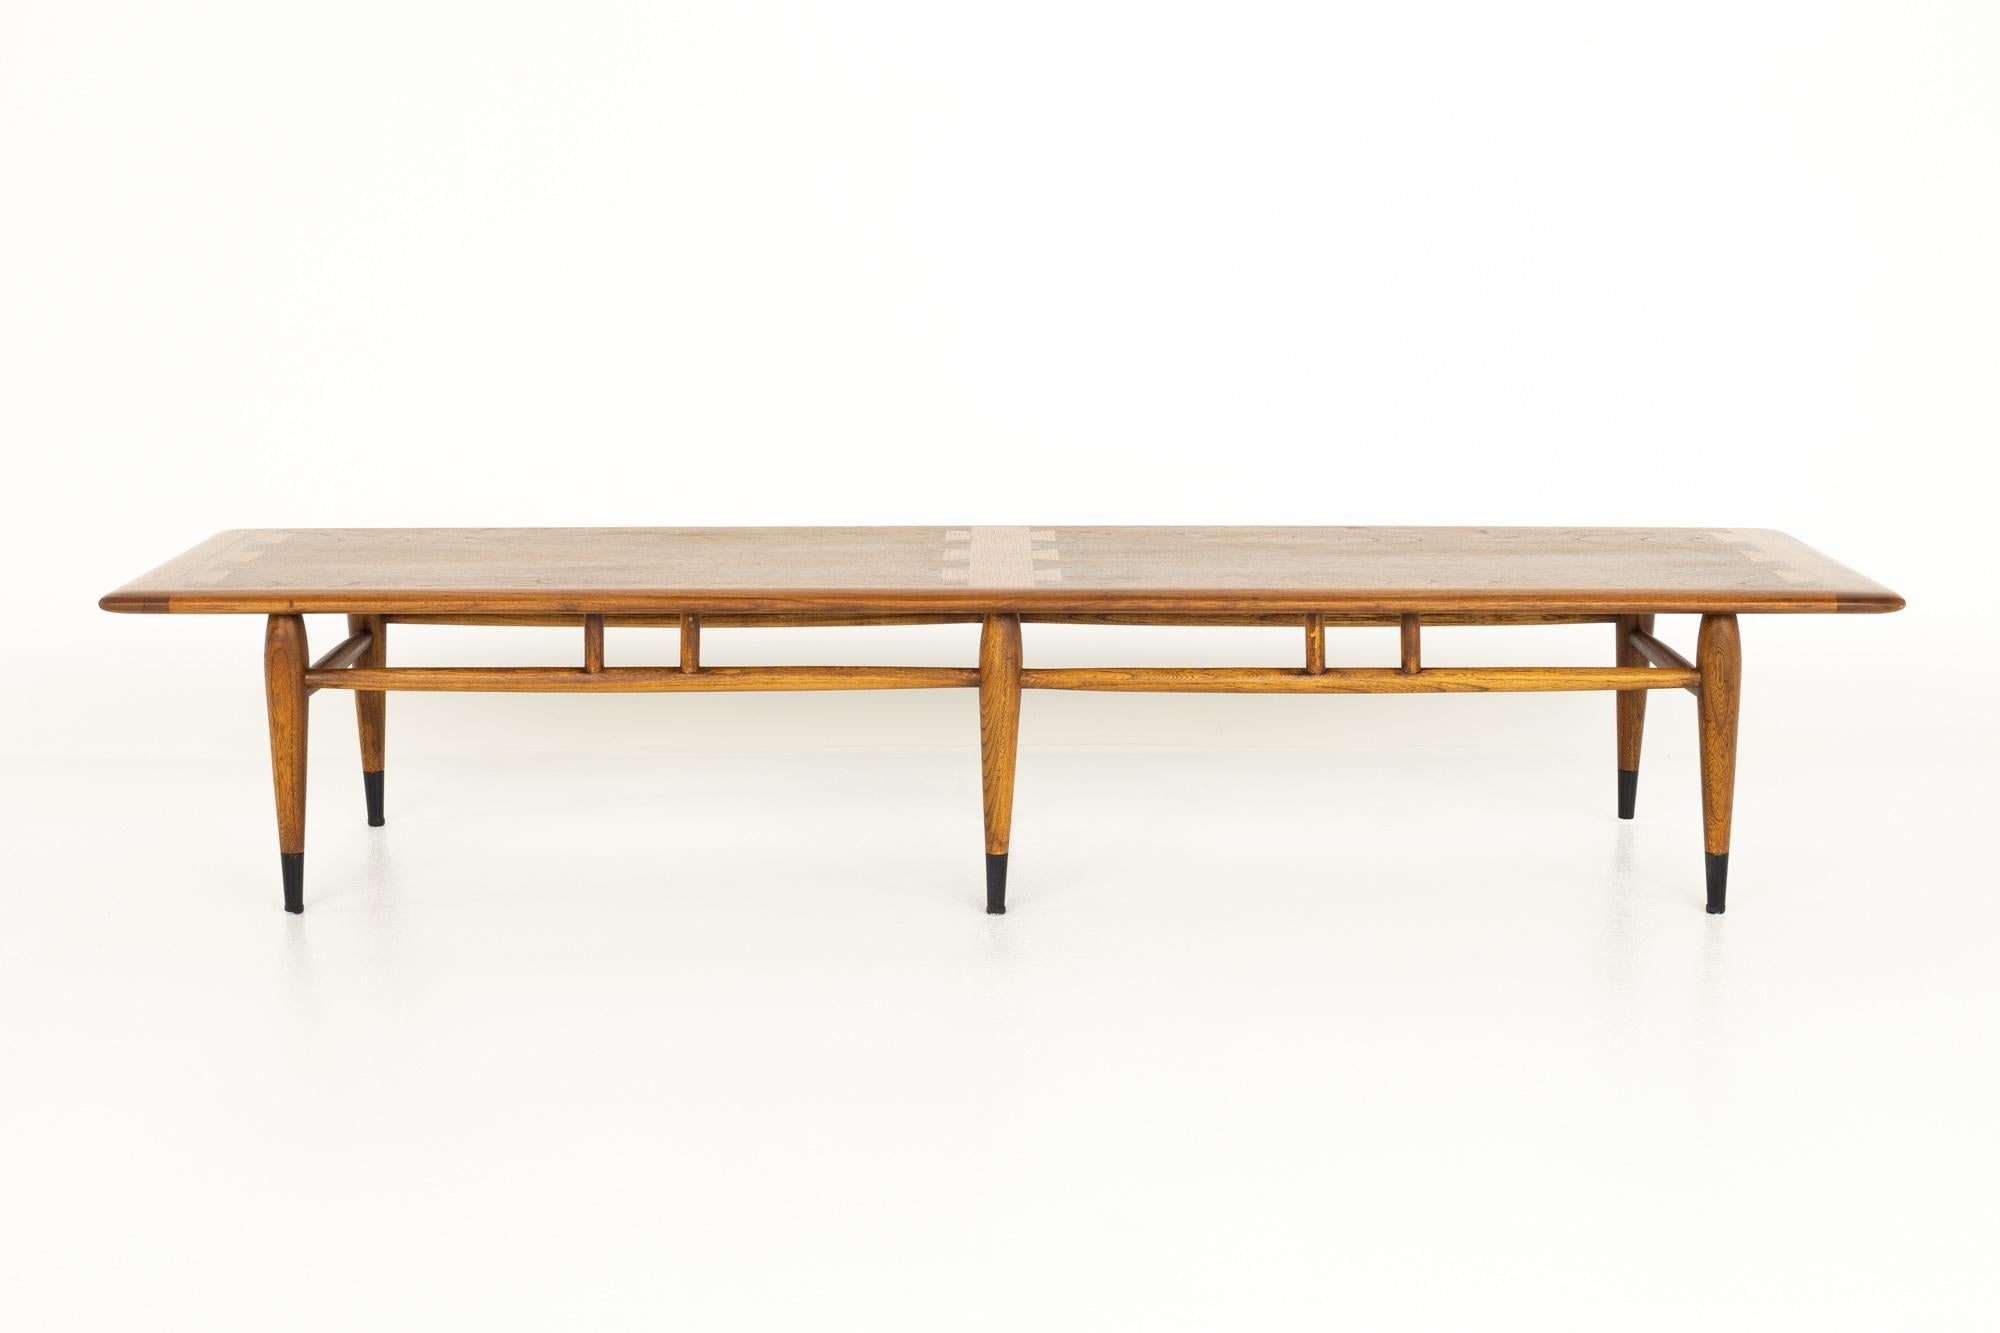 Lane Acclaim Mid Century Extra Long Walnut Dovetail Coffee Table

This coffee table measures: 70 wide x 18 deep x 13 inches high

?All pieces of furniture can be had in what we call restored vintage condition. That means the piece is restored